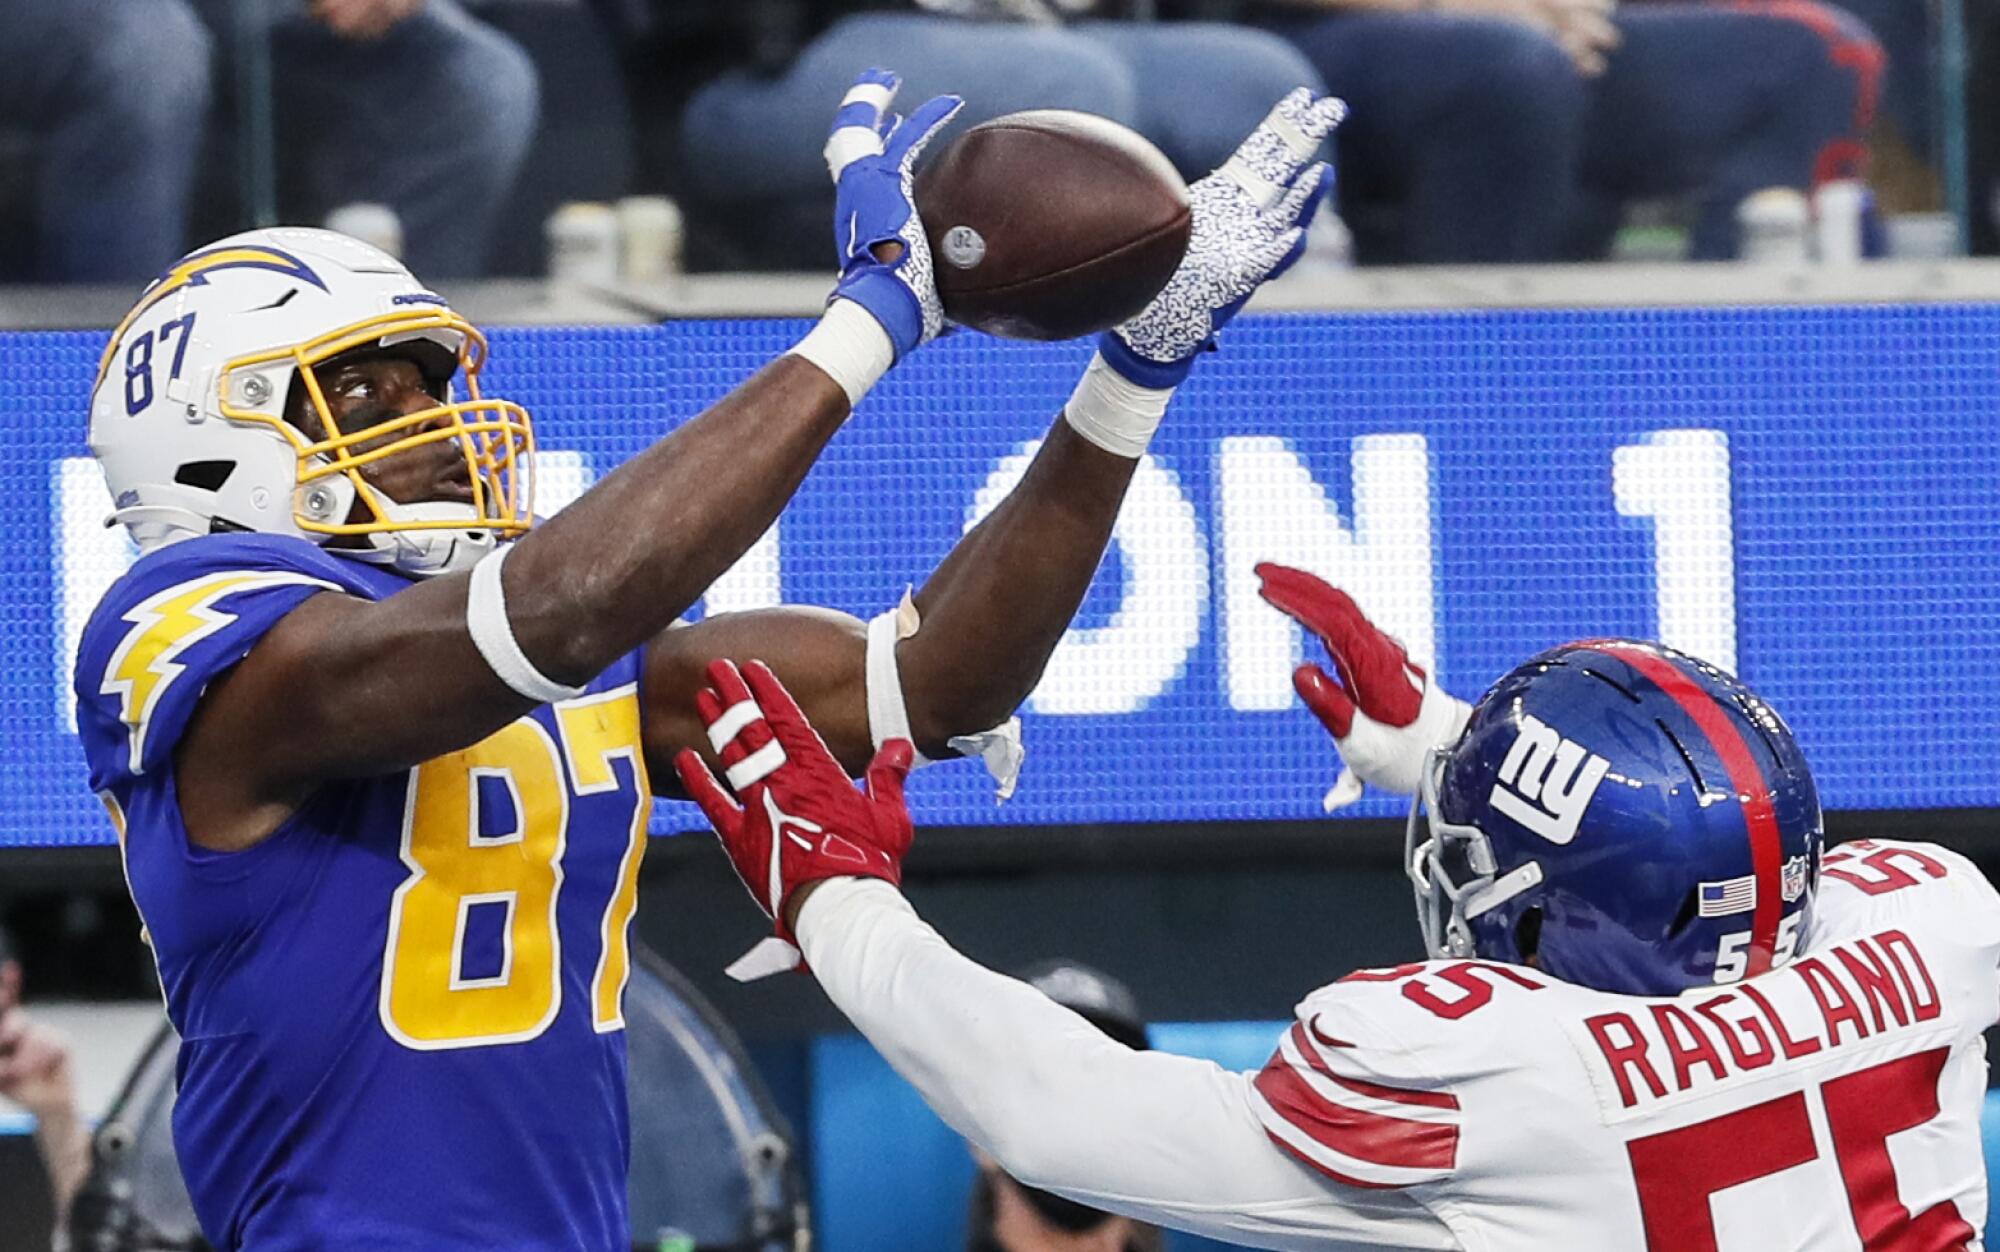 Chargers tight end Jared Cook catches a touchdown pass over New York Giants inside linebacker Reggie Ragland.